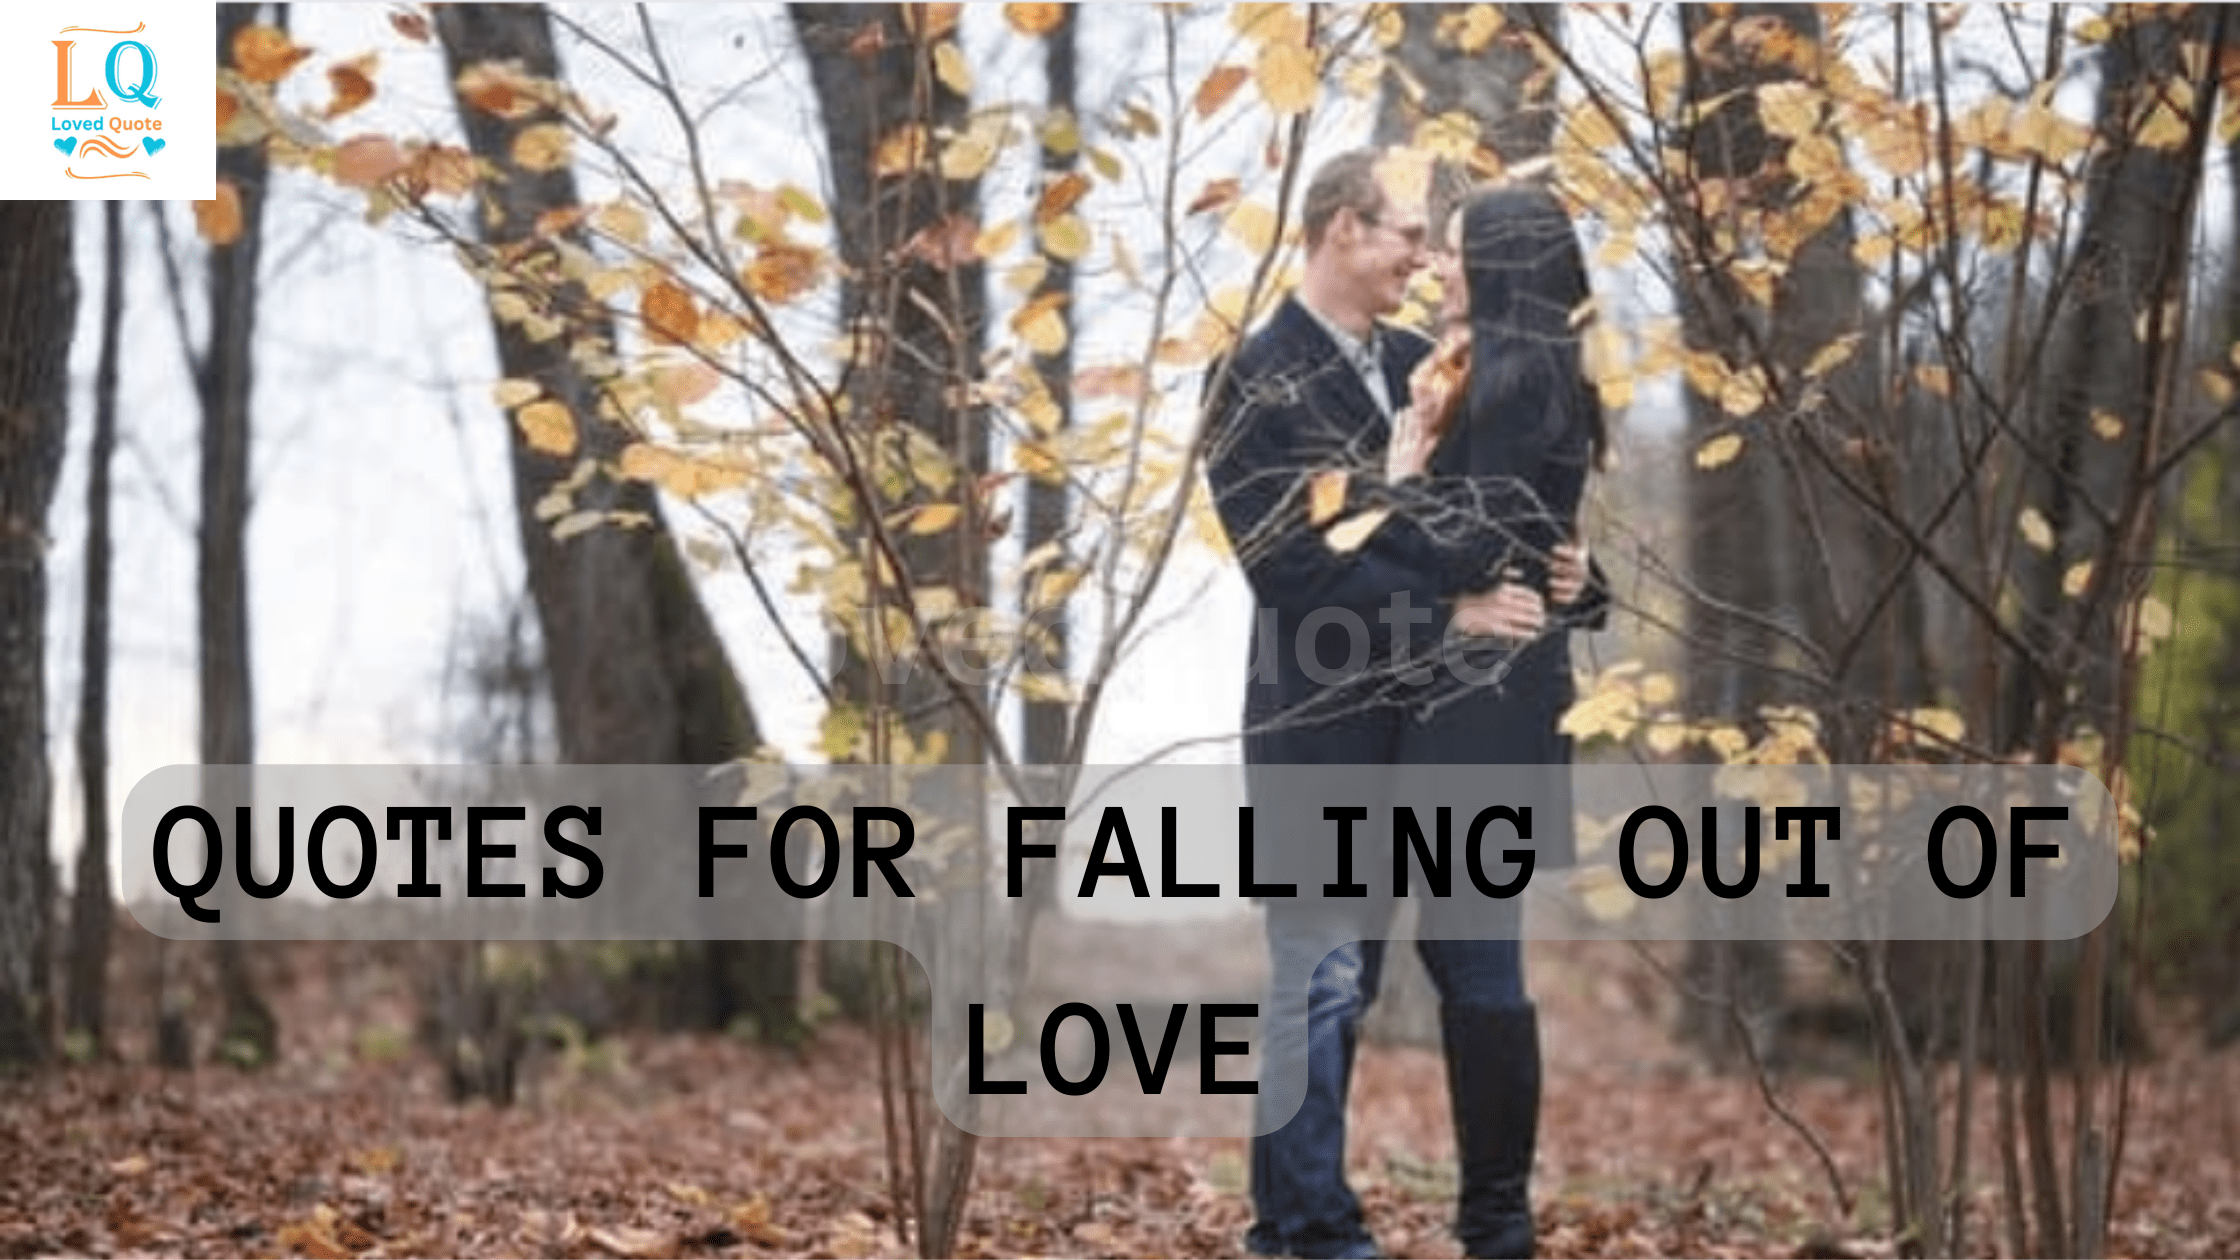 Quotes for Falling out of Love